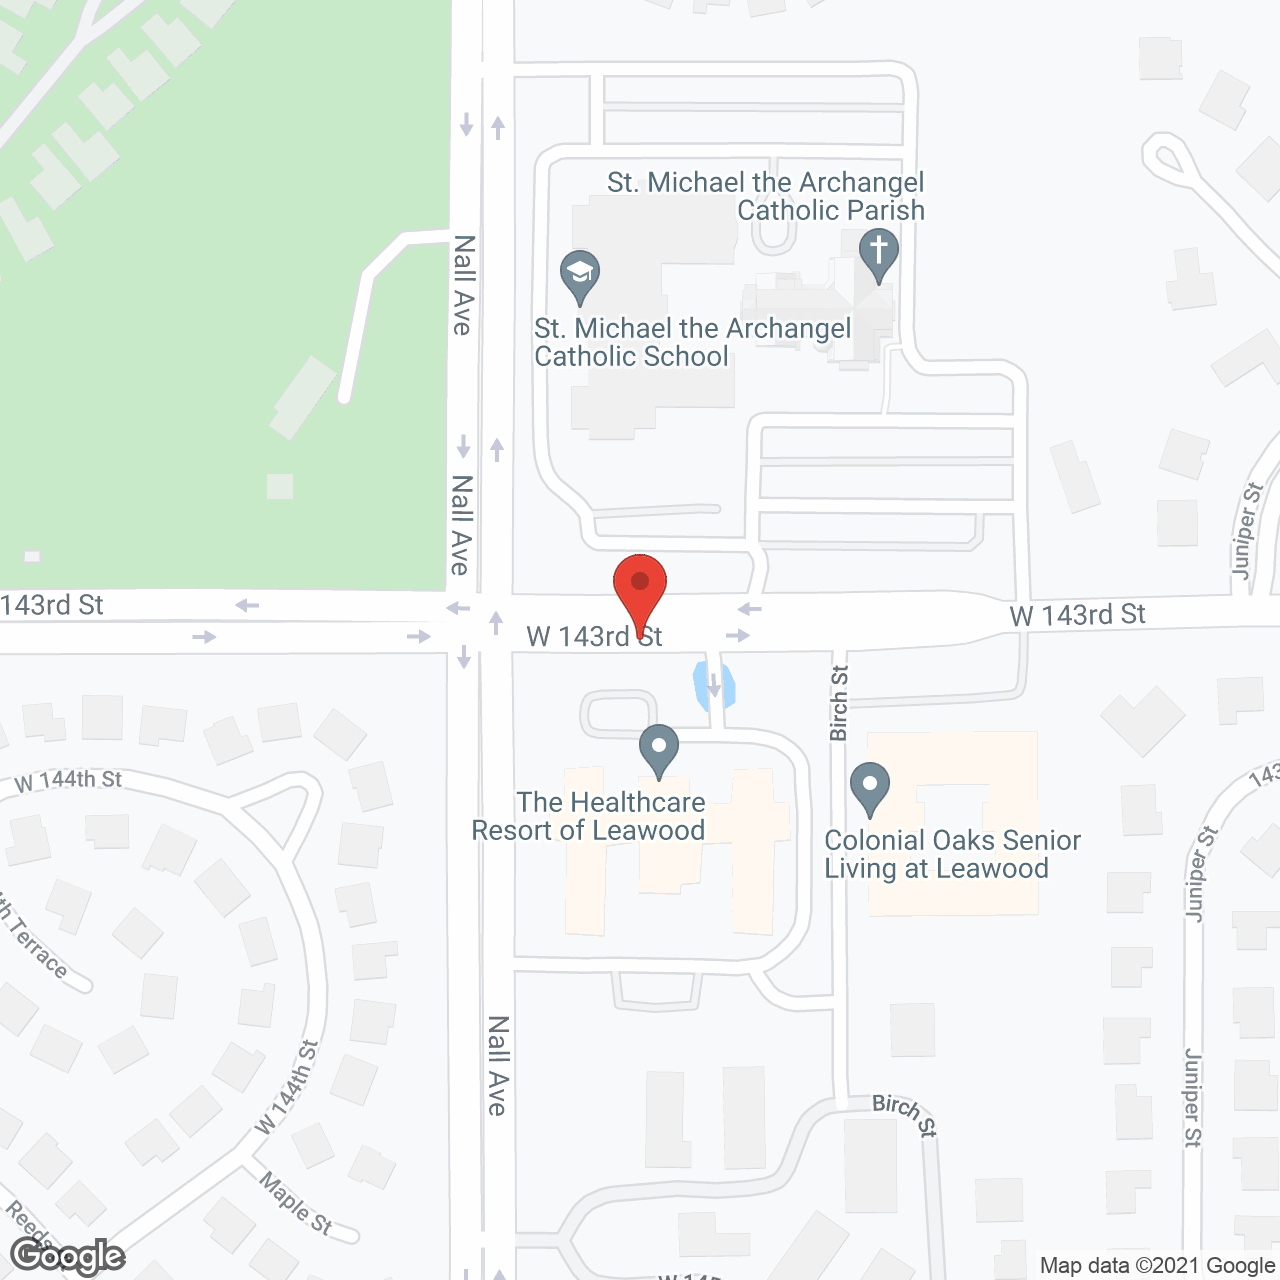 The Healthcare Resort of Leawood in google map